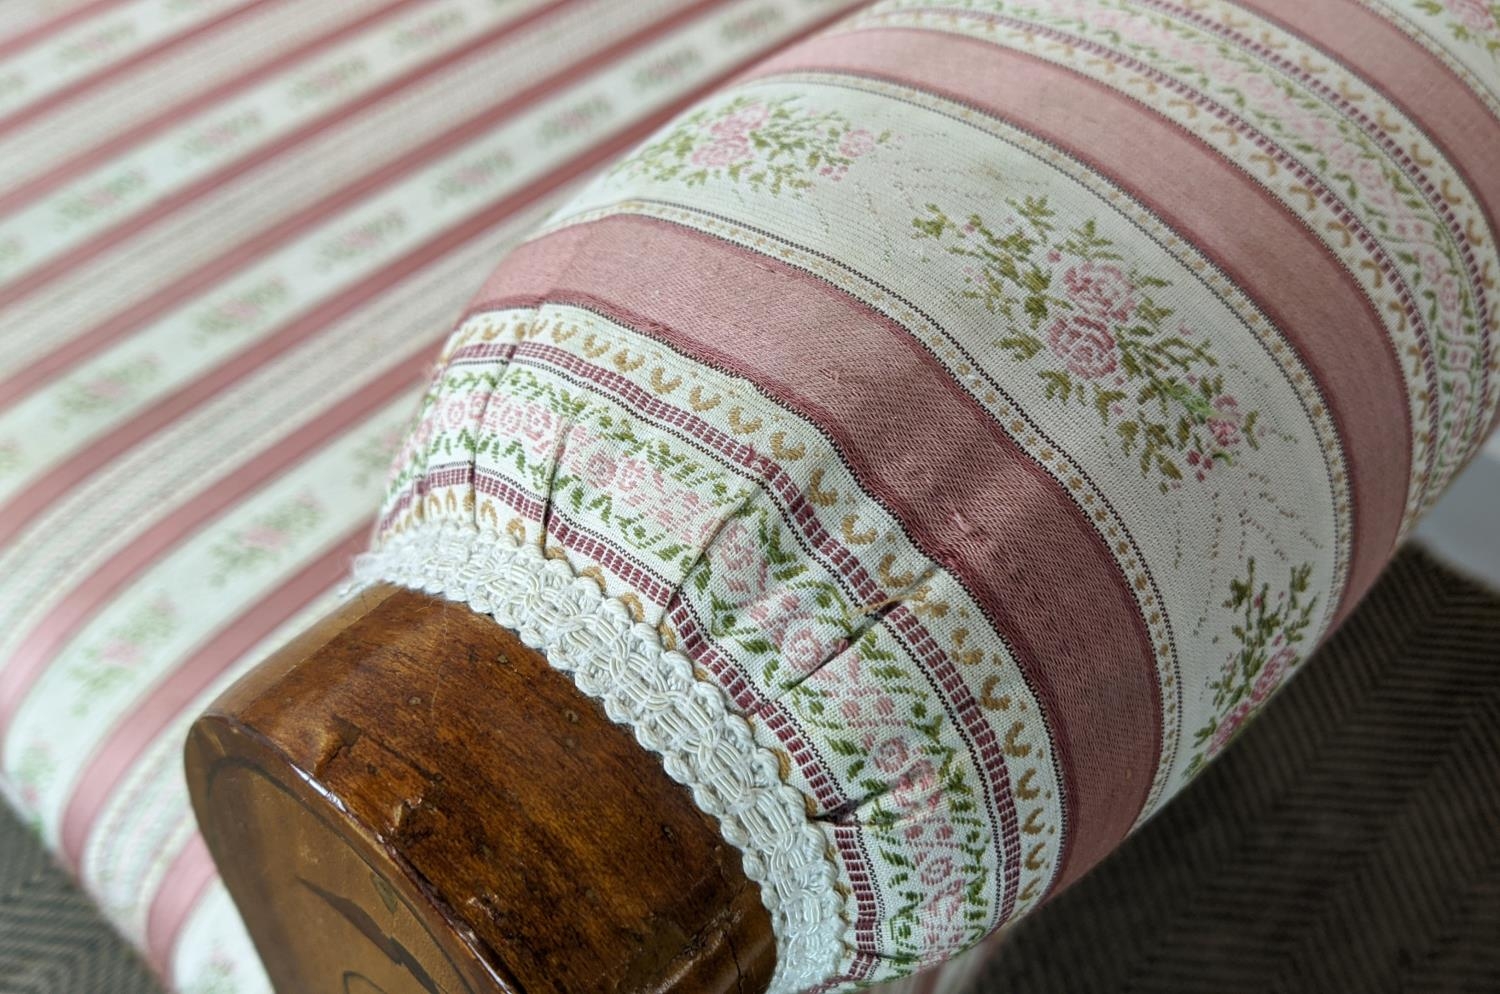 SOFA, Biedermeier cherrywood and line inlaid with pink striped upholstery, 104cm H x 168cm x 68cm. - Image 13 of 24